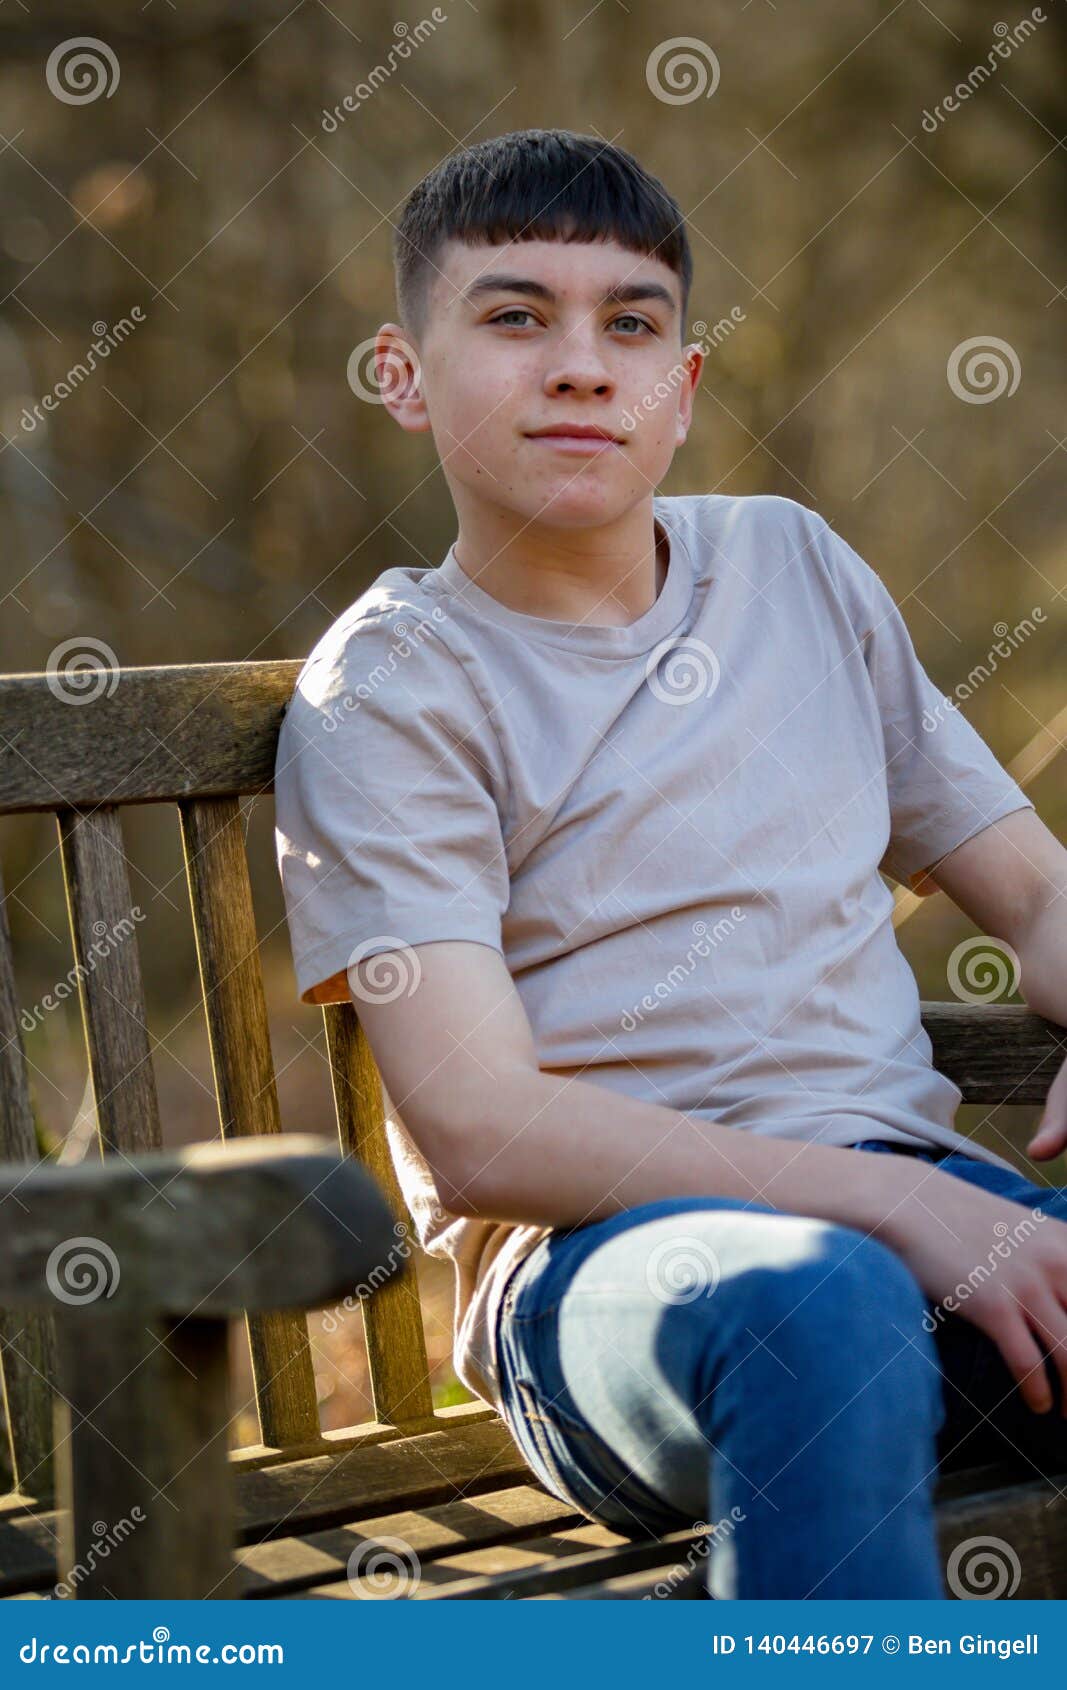 Teenage Boy Outside on a Bright Spring Day Stock Image - Image of teen ...